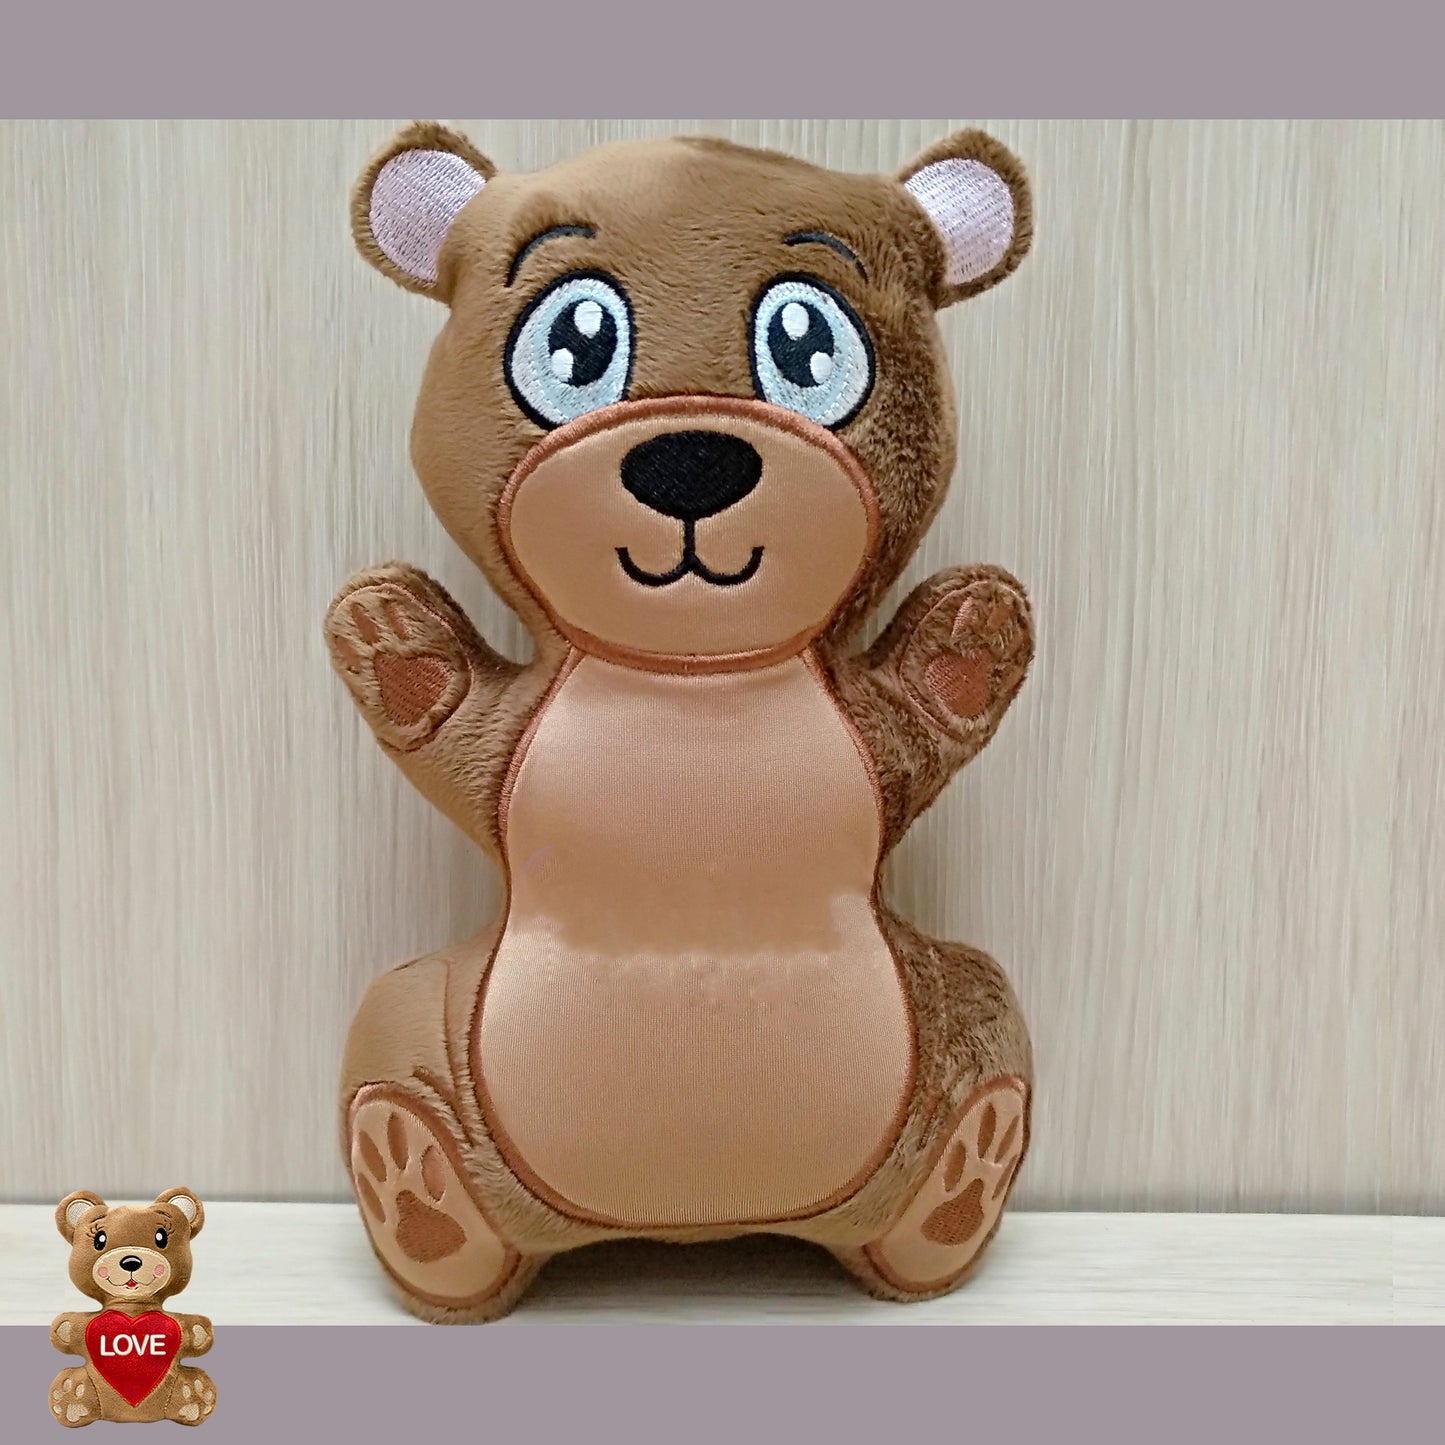 Personalised brown BearTeddy Stuffed Toy ,Super cute personalised soft plush toy, Personalised Gift, Unique Personalized Birthday Gifts , Custom Gifts For Children